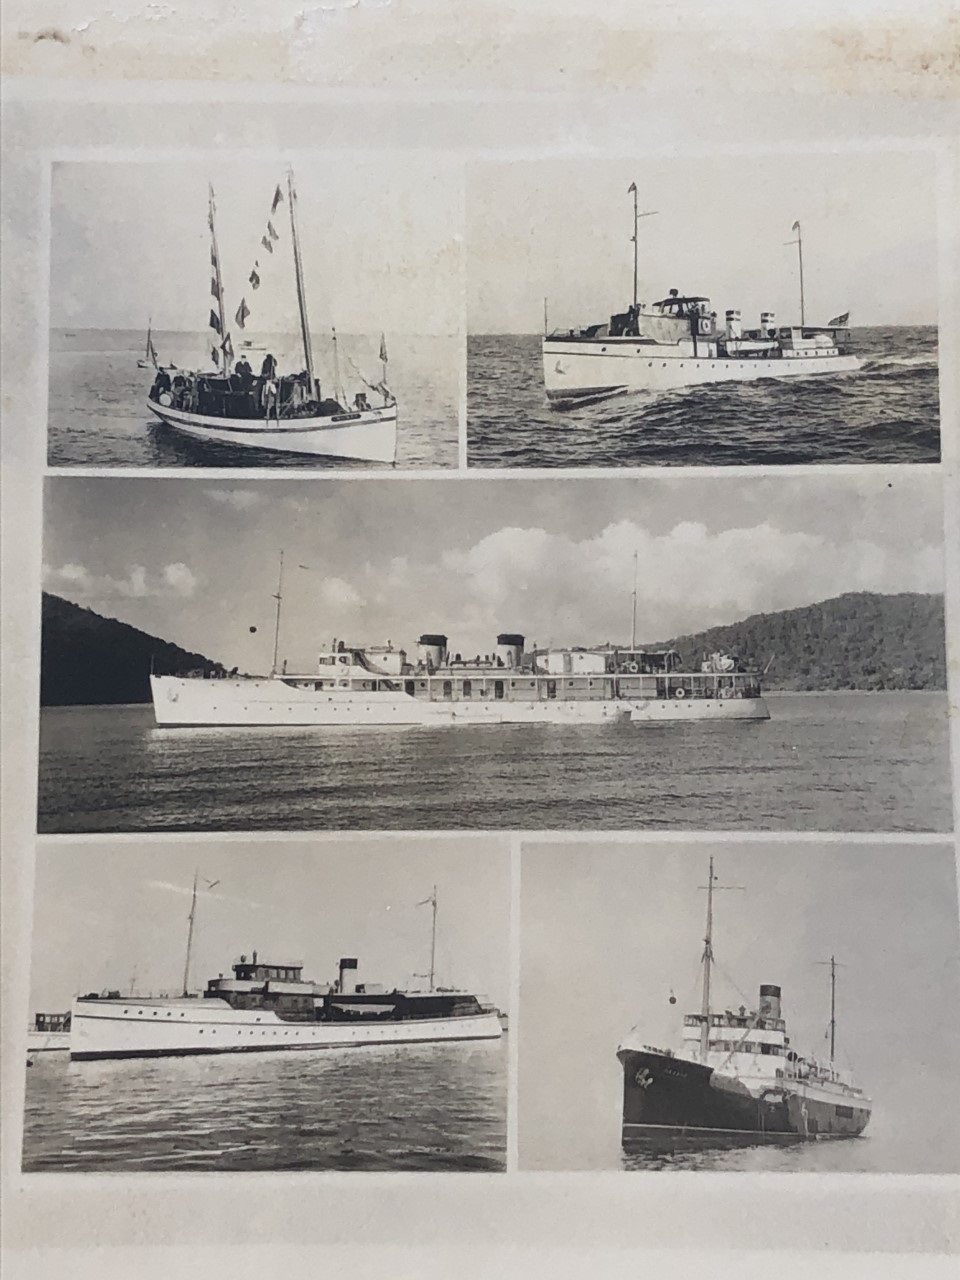 Images of various boats